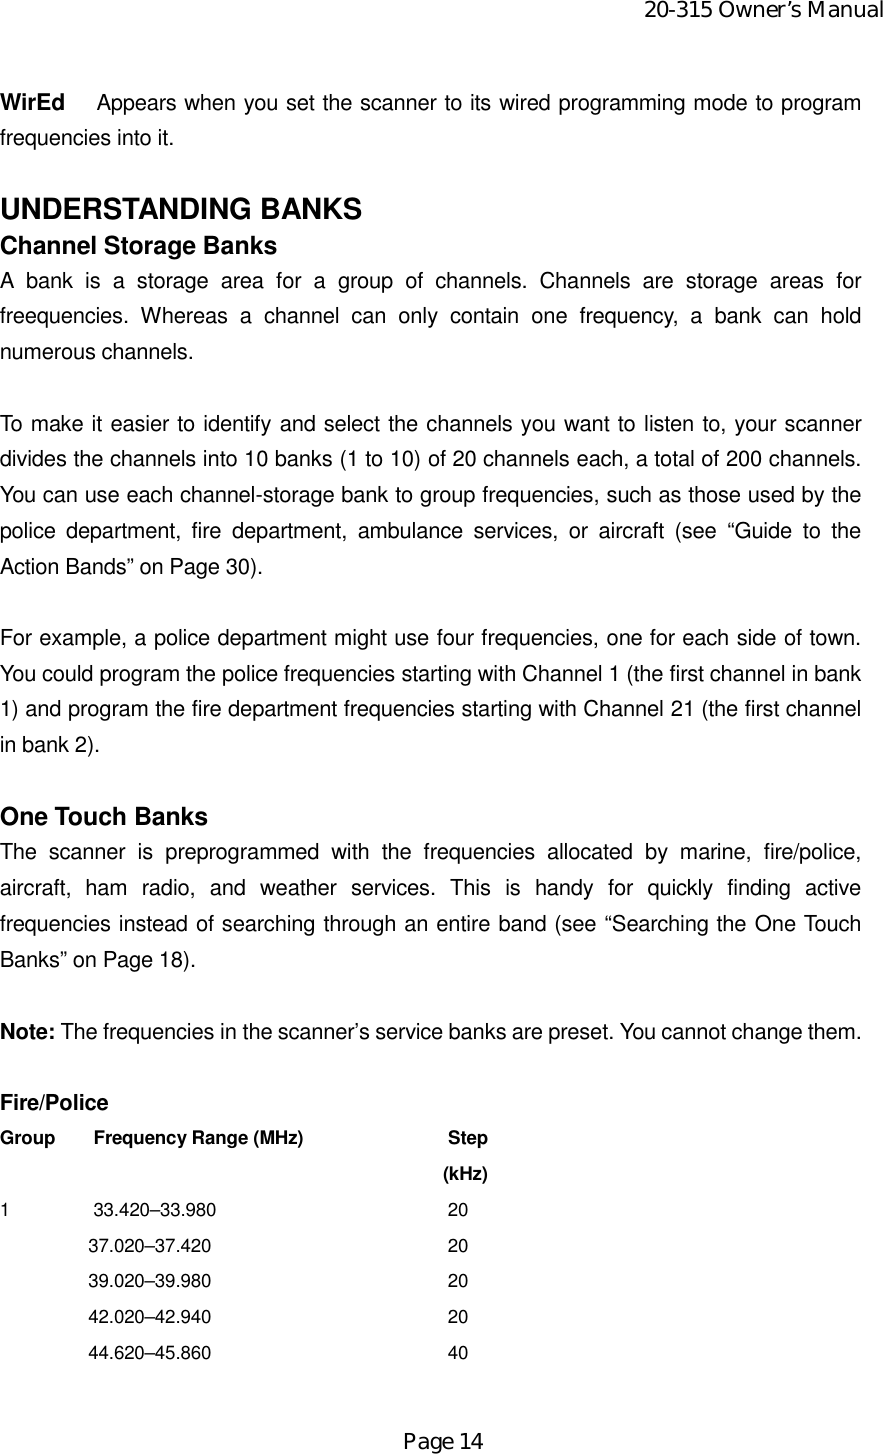 20-315 Owner’s ManualPage 14WirEd  Appears when you set the scanner to its wired programming mode to programfrequencies into it.UNDERSTANDING BANKSChannel Storage BanksA bank is a storage area for a group of channels. Channels are storage areas forfreequencies. Whereas a channel can only contain one frequency, a bank can holdnumerous channels.To make it easier to identify and select the channels you want to listen to, your scannerdivides the channels into 10 banks (1 to 10) of 20 channels each, a total of 200 channels.You can use each channel-storage bank to group frequencies, such as those used by thepolice department, fire department, ambulance services, or aircraft (see “Guide to theAction Bands” on Page 30).For example, a police department might use four frequencies, one for each side of town.You could program the police frequencies starting with Channel 1 (the first channel in bank1) and program the fire department frequencies starting with Channel 21 (the first channelin bank 2).One Touch BanksThe scanner is preprogrammed with the frequencies allocated by marine, fire/police,aircraft, ham radio, and weather services. This is handy for quickly finding activefrequencies instead of searching through an entire band (see “Searching the One TouchBanks” on Page 18).Note: The frequencies in the scanner’s service banks are preset. You cannot change them.Fire/PoliceGroup  Frequency Range (MHz)  Step(kHz)1  33.420–33.980  2037.020–37.420  2039.020–39.980  2042.020–42.940  2044.620–45.860  40